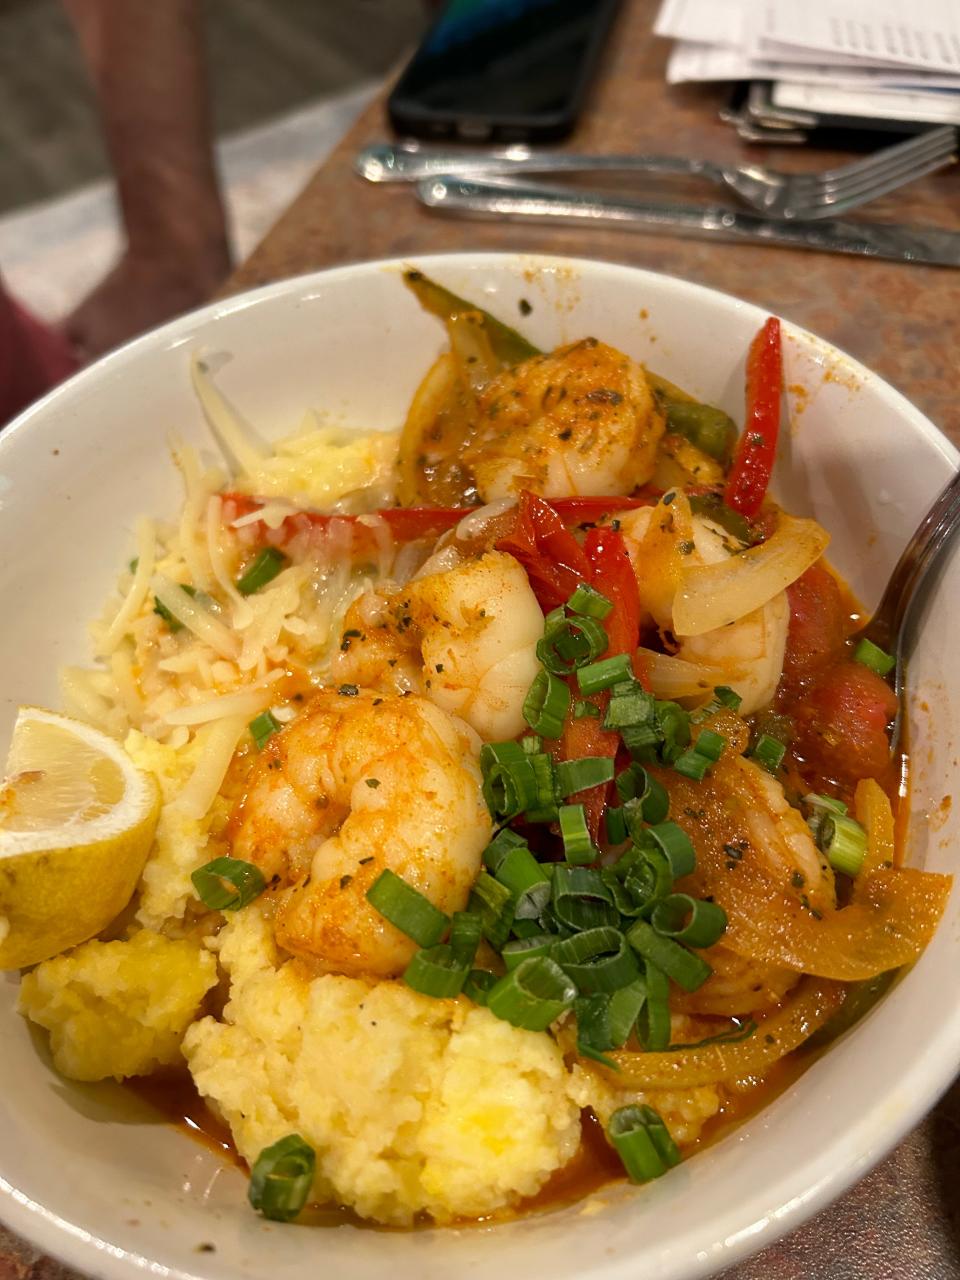 Shrimp and grits feature white cheddar stoneground grits, Cajun shrimp, sauteed cherry tomatoes, shallots, mixed peppers and green onion in a white wine sauce at Caston & Main.